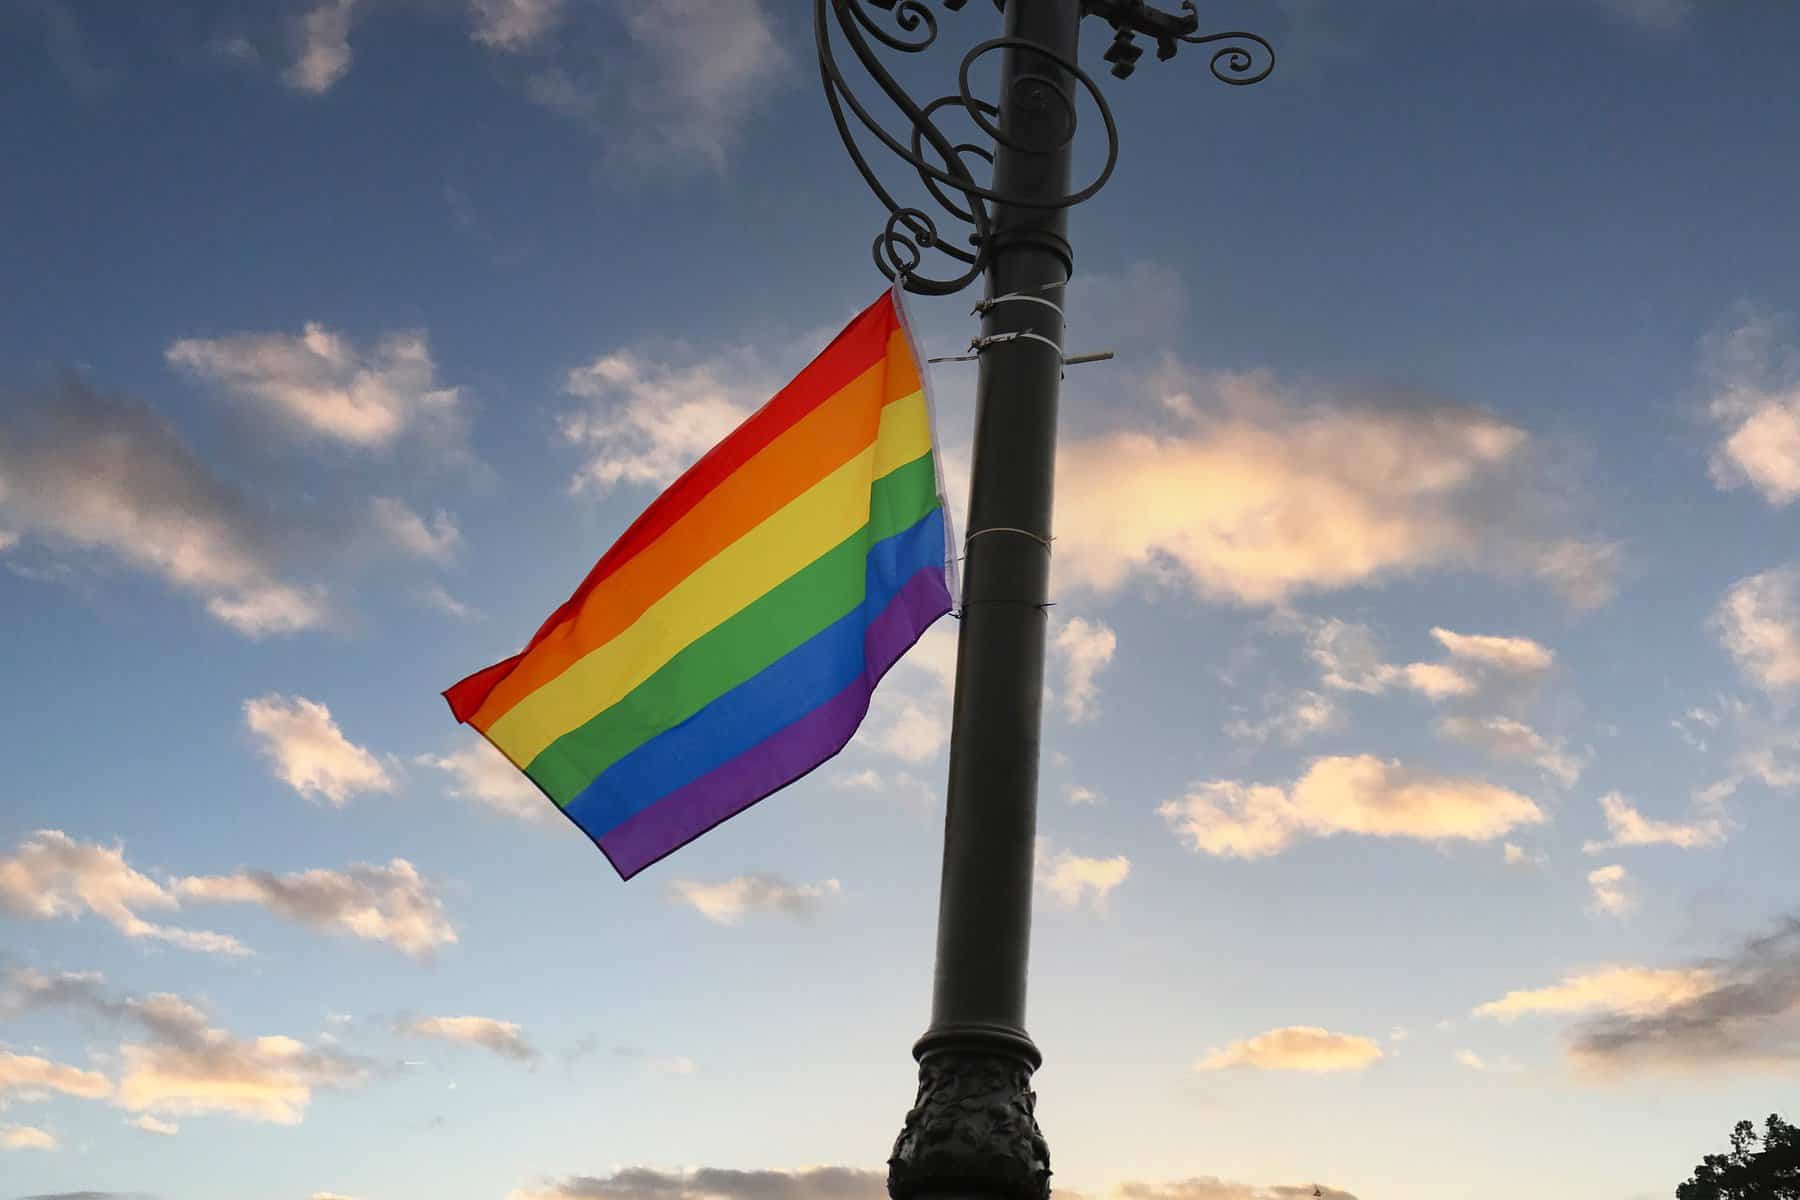 A pride flag is shown waving in the breeze atop an ornate flagpole.